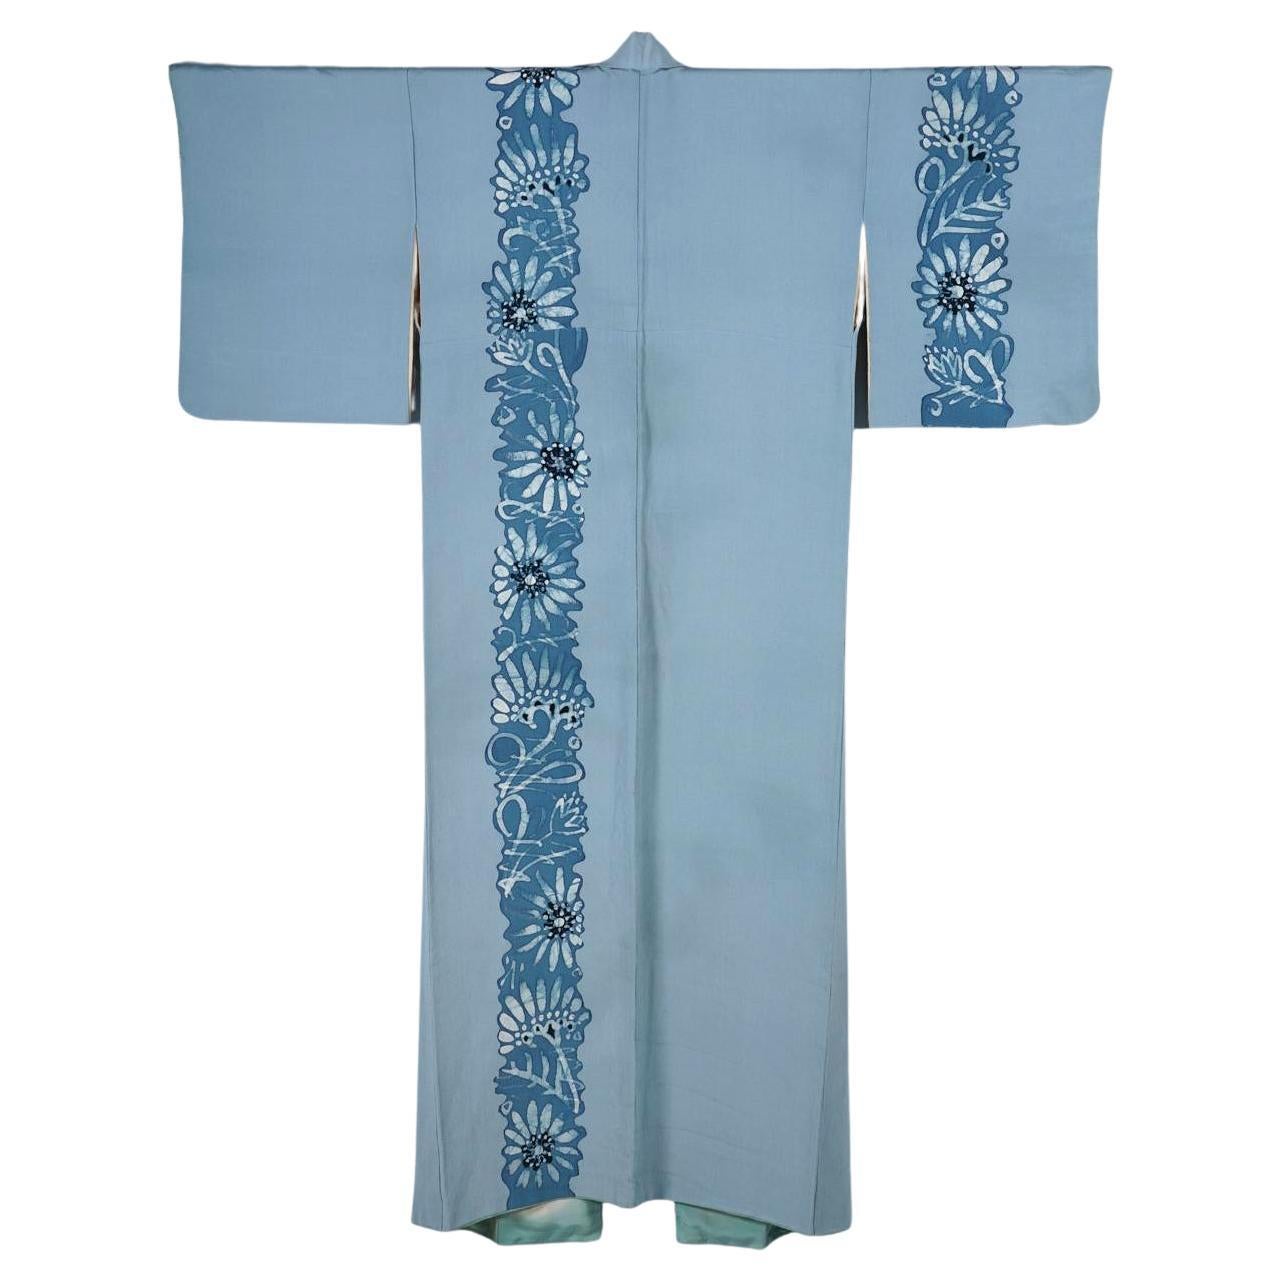 A Japanese formal silk Kimono in a light blue color with striking floral design. The garment is hand-stitched from a crepe like silk and dated to circa 1940-60s. The garment is sparsely but effectively decorated with bands of chains of daisies,